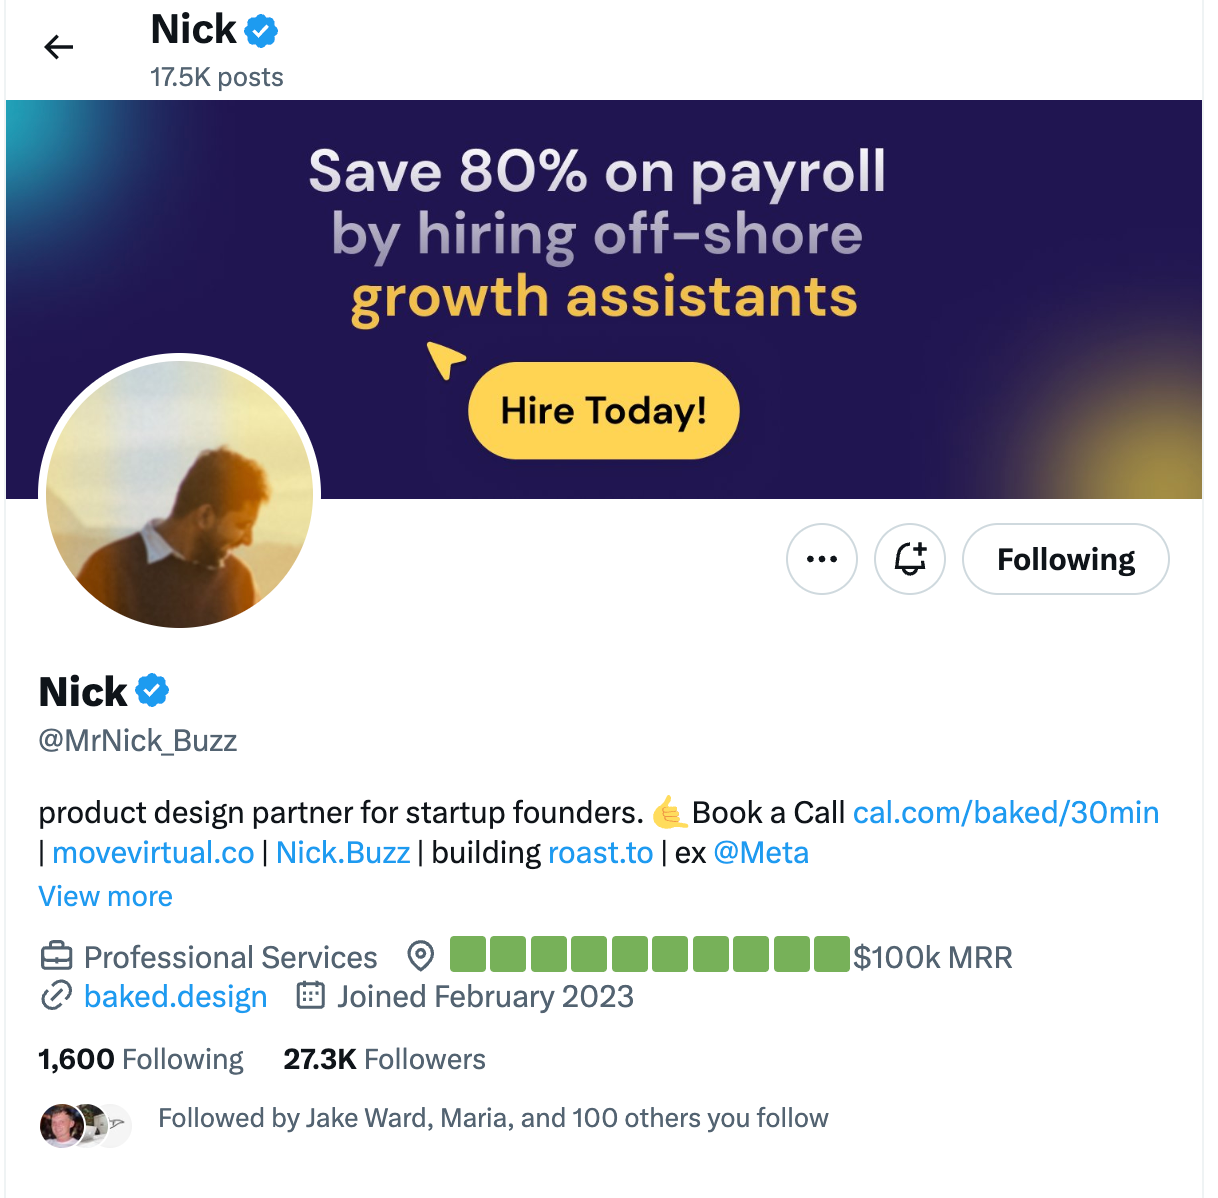 From Passion Project to $25k MRR:  How Nick Built a Thriving Startup Consulting Business